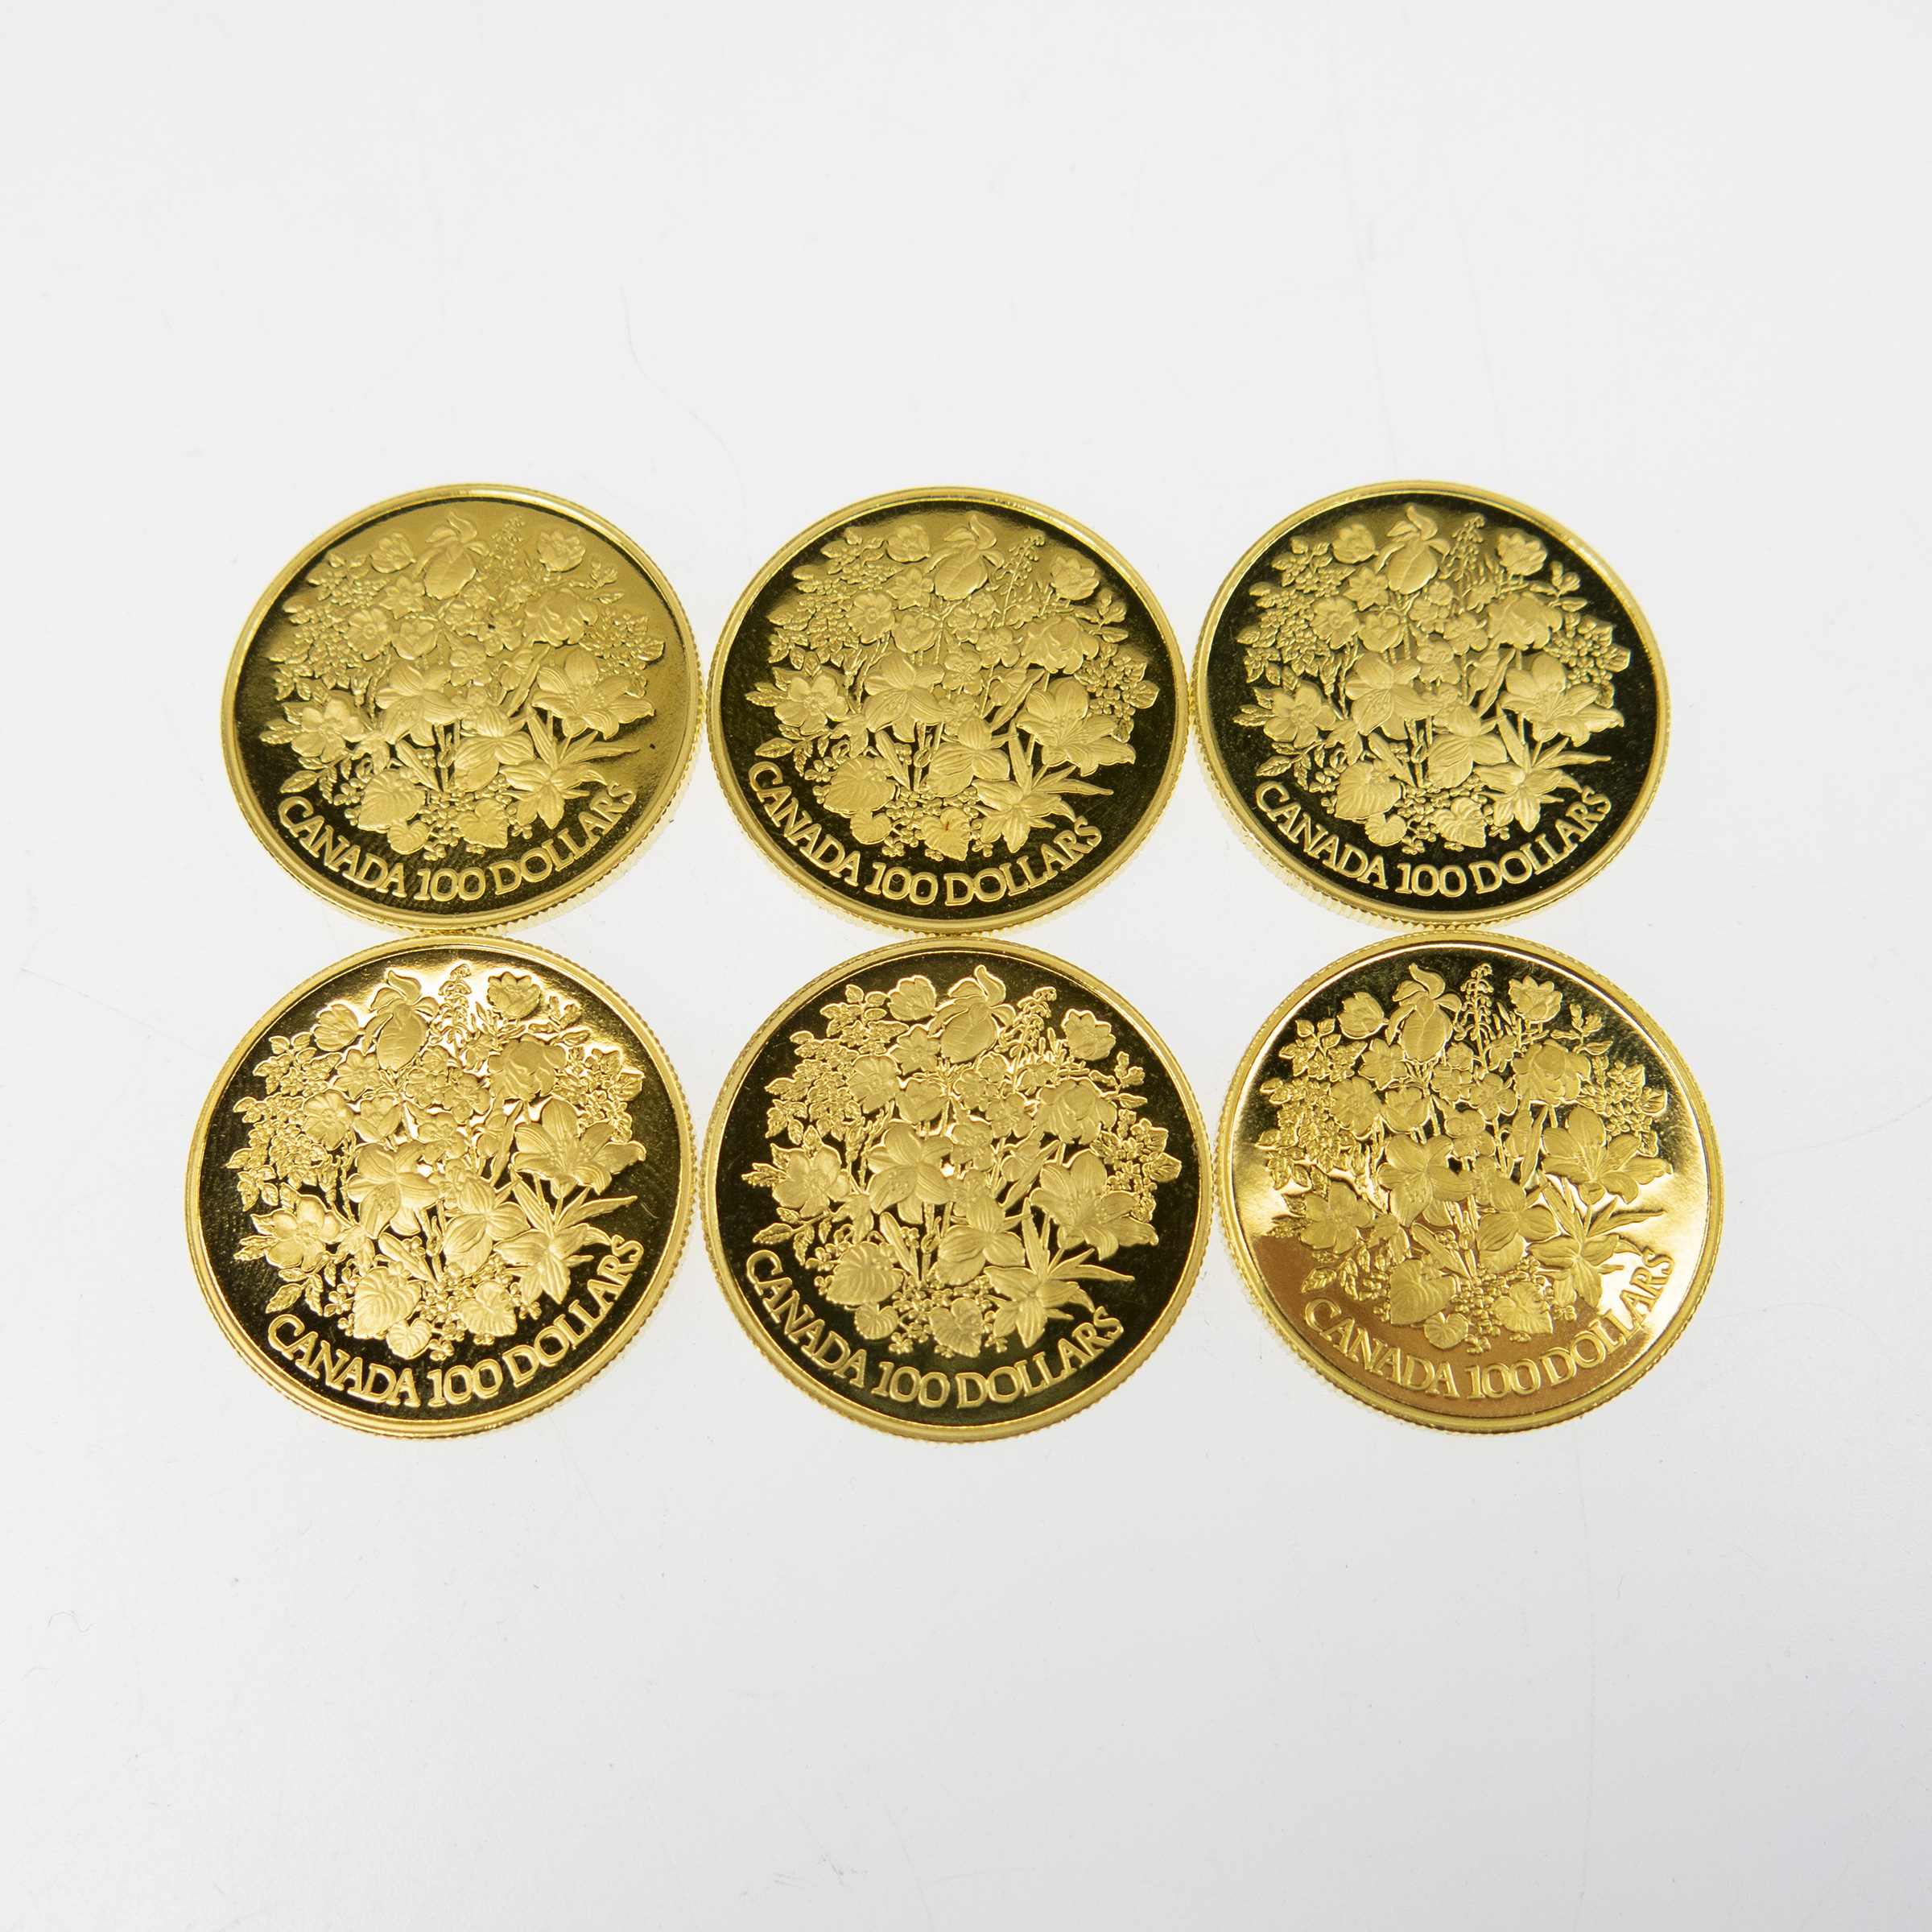 Six Canadian 1977 $100 Gold Coins